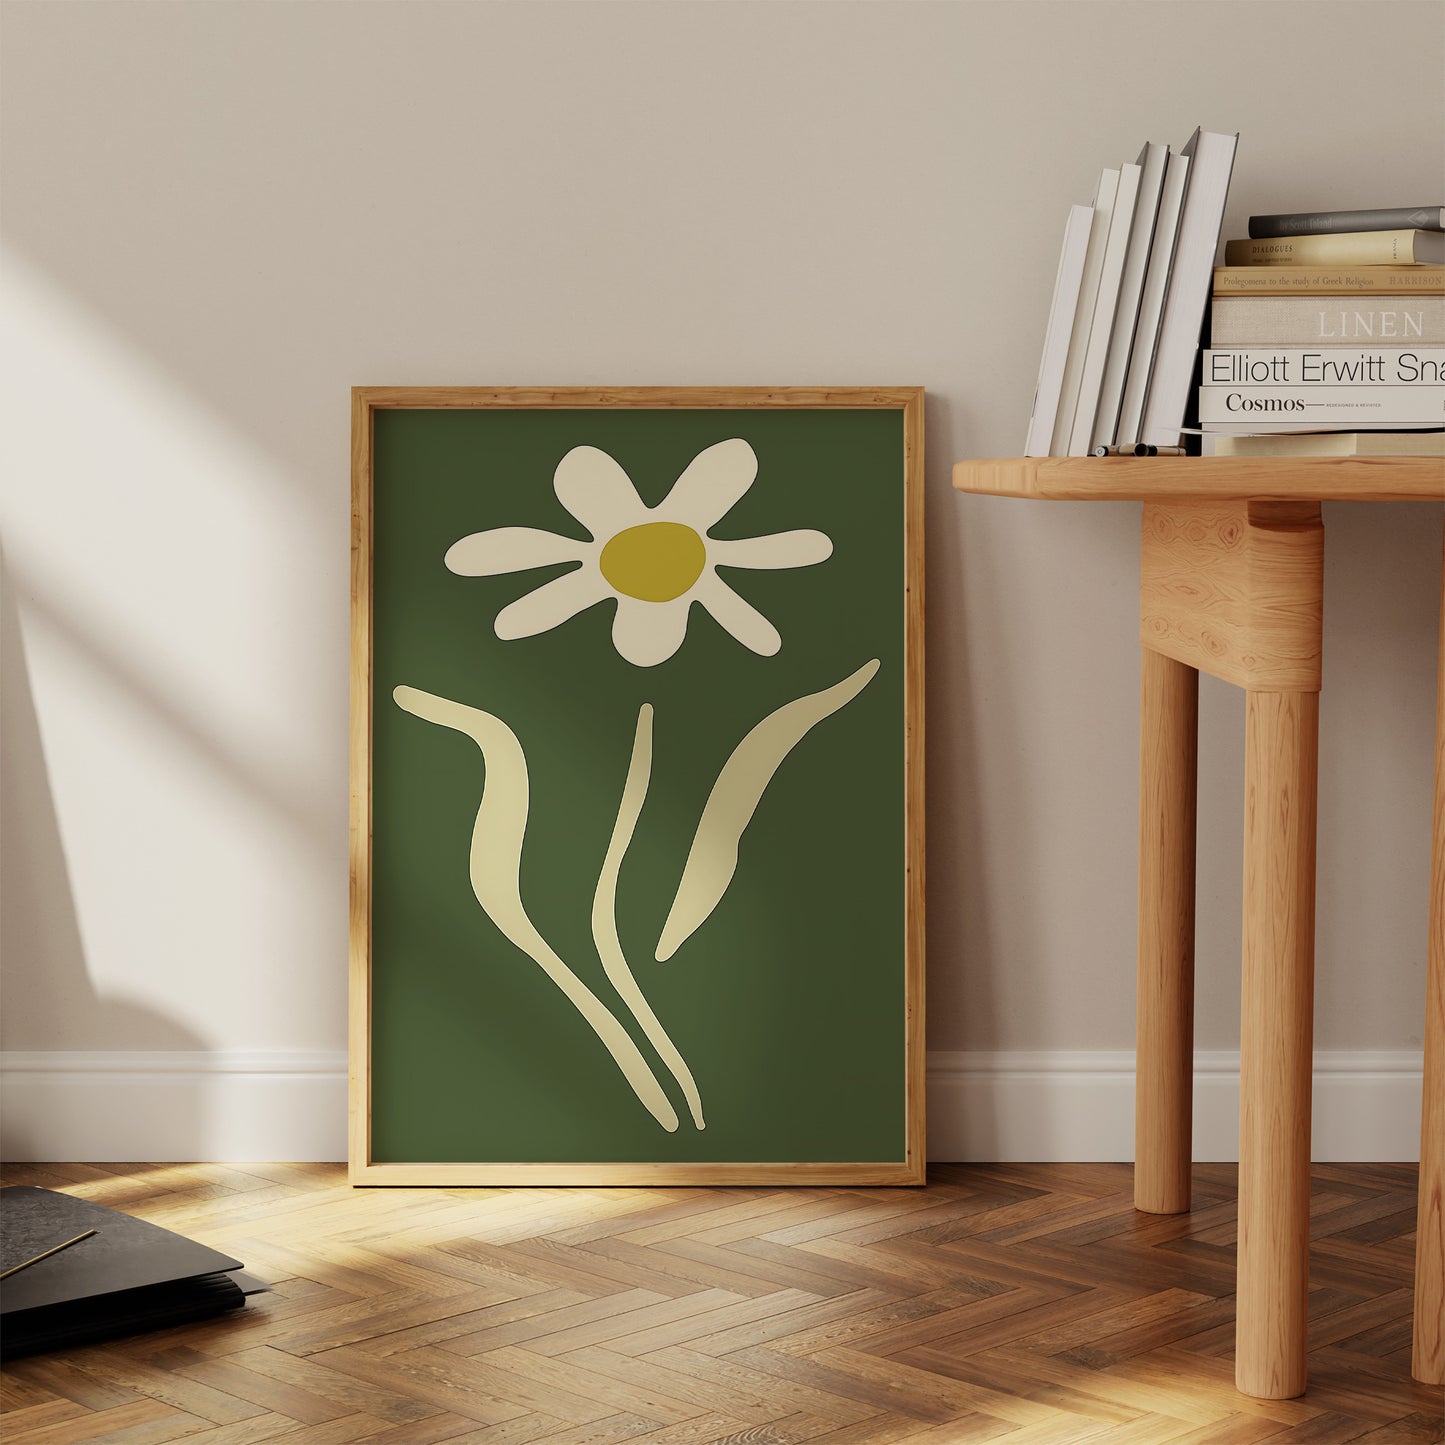 A framed abstract painting of a white flower against a green background leaning against a wall next to a wooden table.